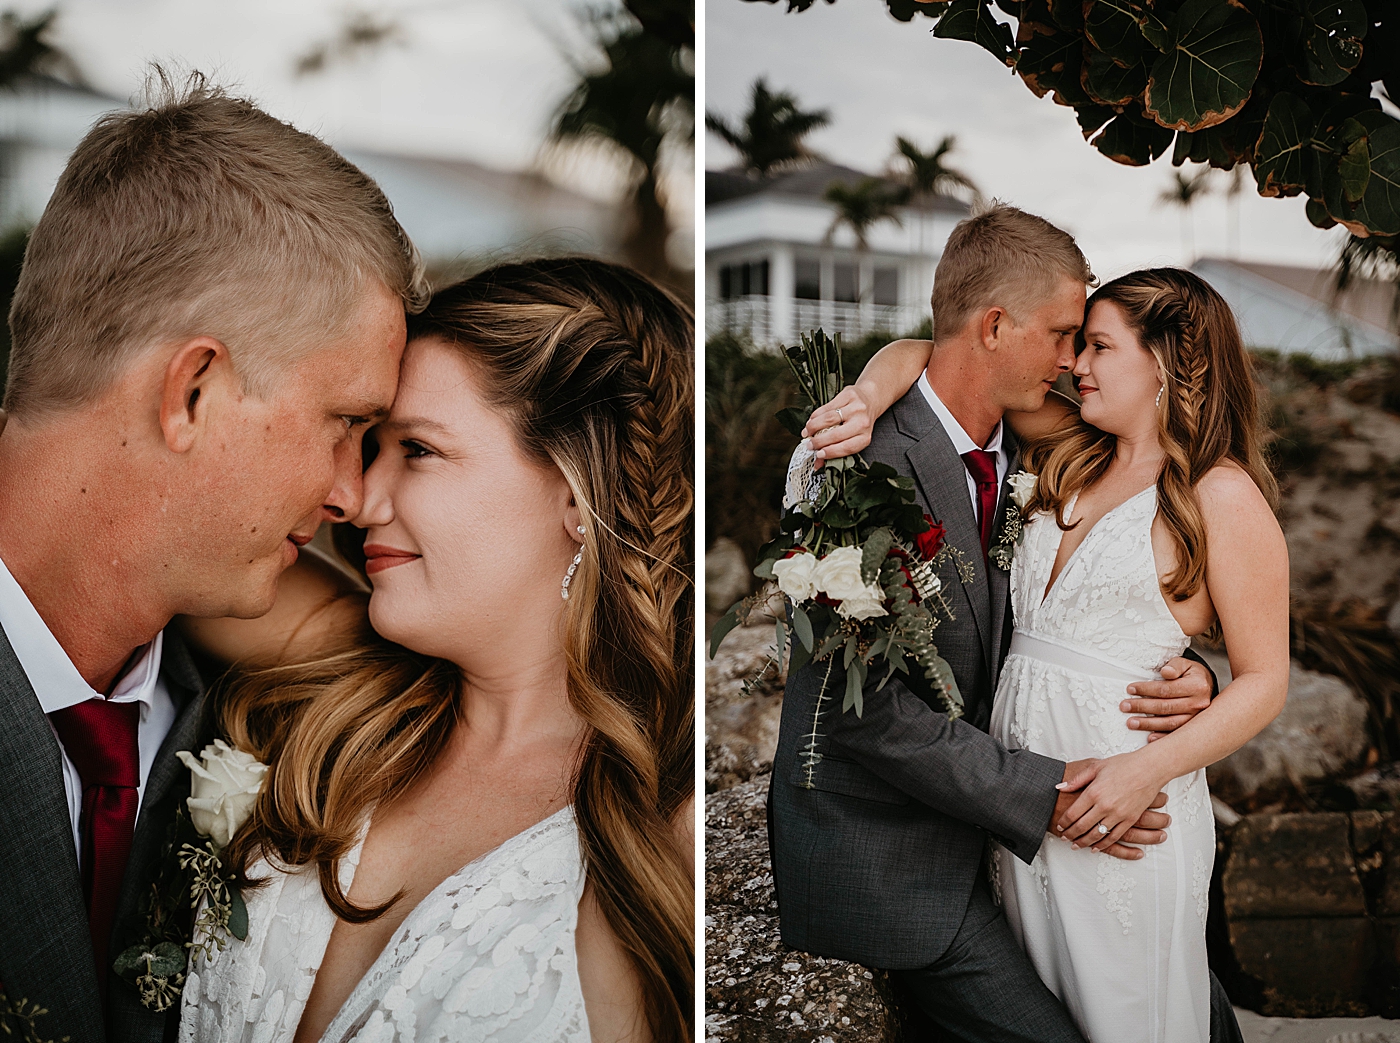 Bride and Groom nuzzling each other South Florida Elopement Photography captured by Krystal Capone Photography